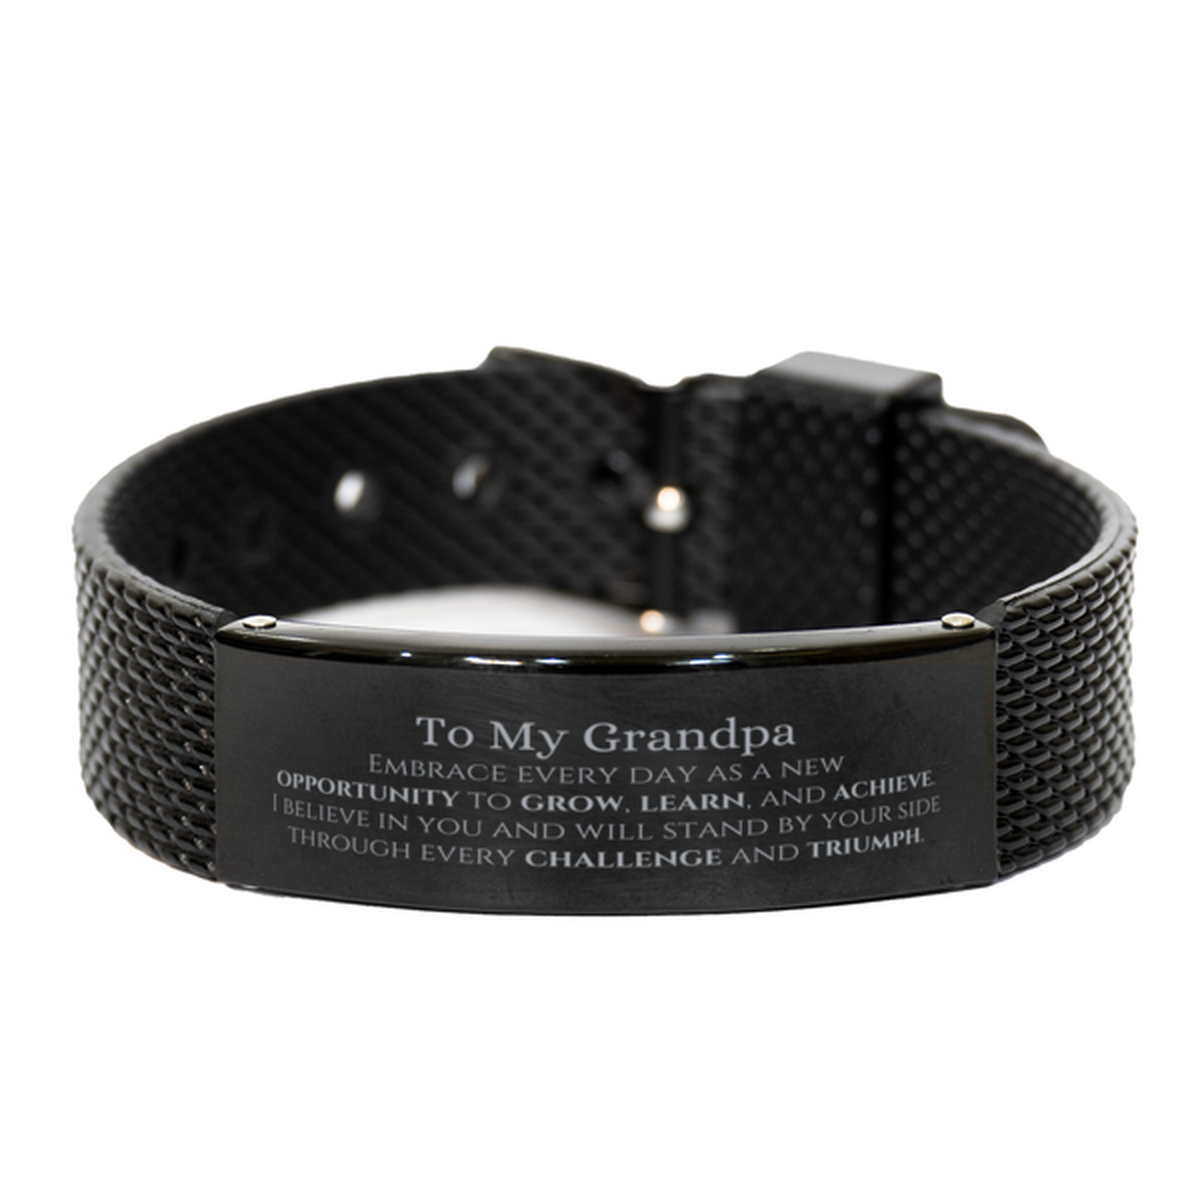 To My Grandpa Gifts, I believe in you and will stand by your side, Inspirational Black Shark Mesh Bracelet For Grandpa, Birthday Christmas Motivational Grandpa Gifts